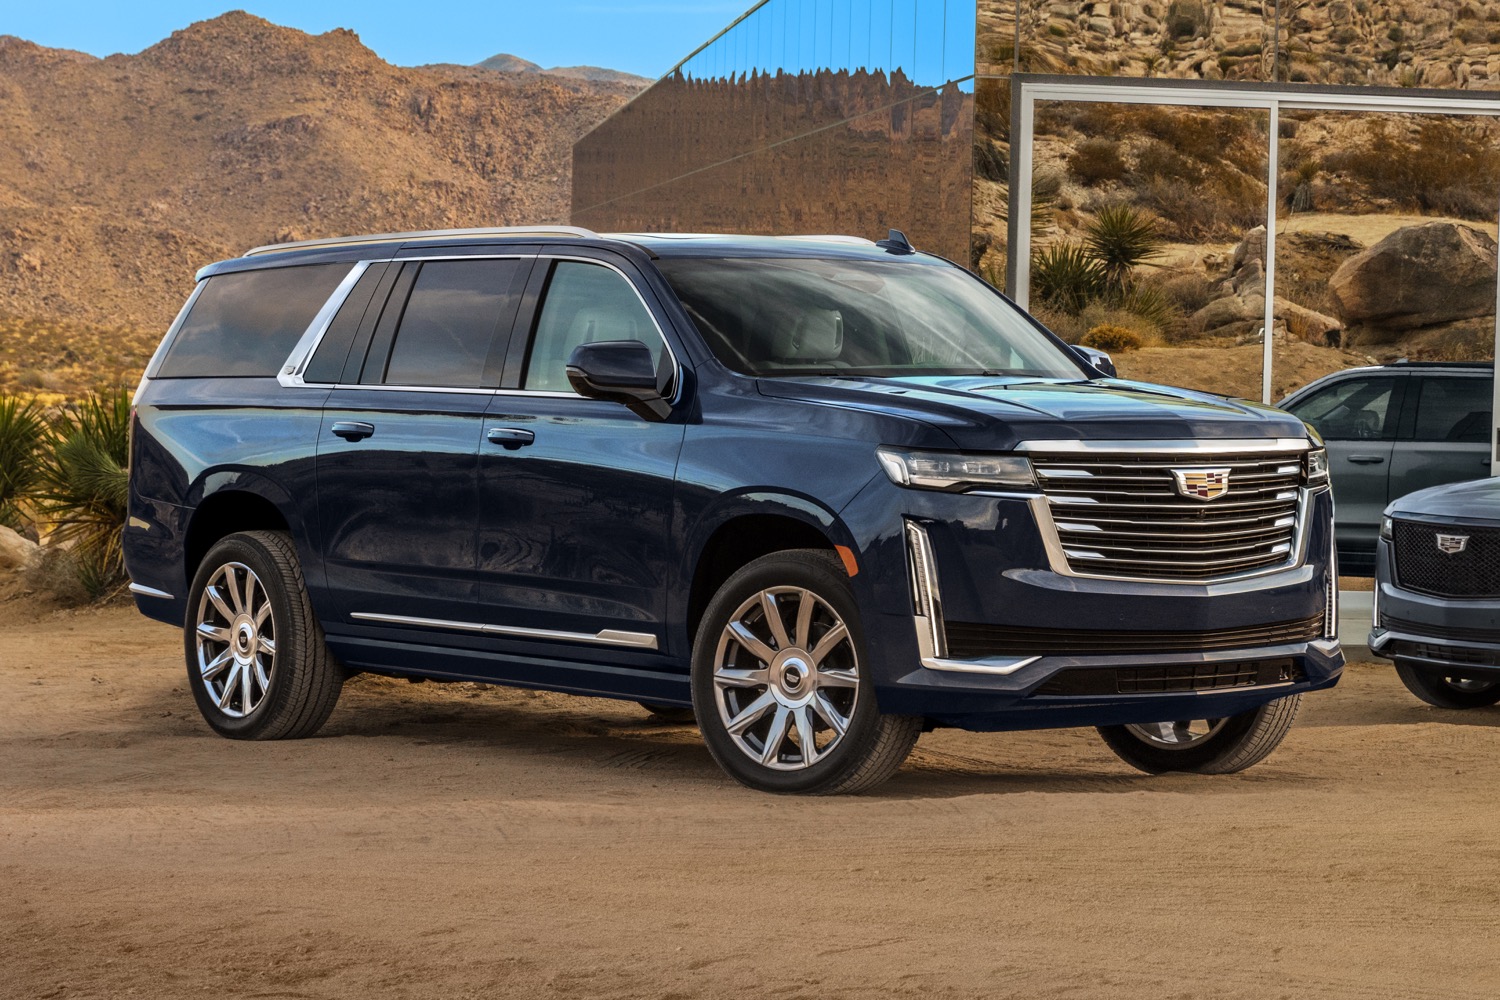 2021 Cadillac Escalade Rendered As Off-Roader | GM Authority